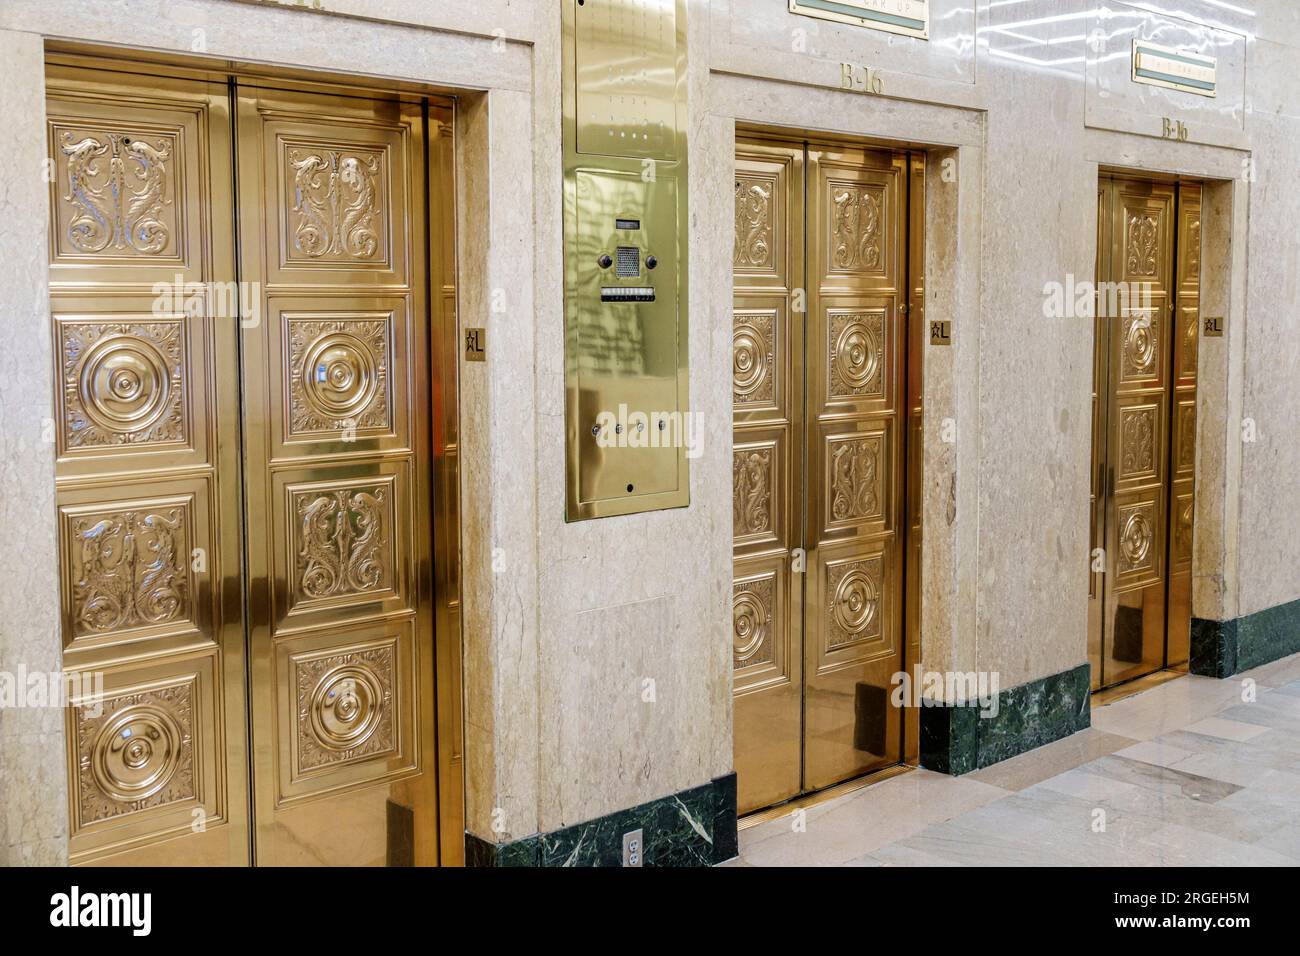 Charlotte North Carolina,South Tryon Street,The Johnston office Building,Neo classical design gold colored doors elevators lobby,inside interior indoo Stock Photo